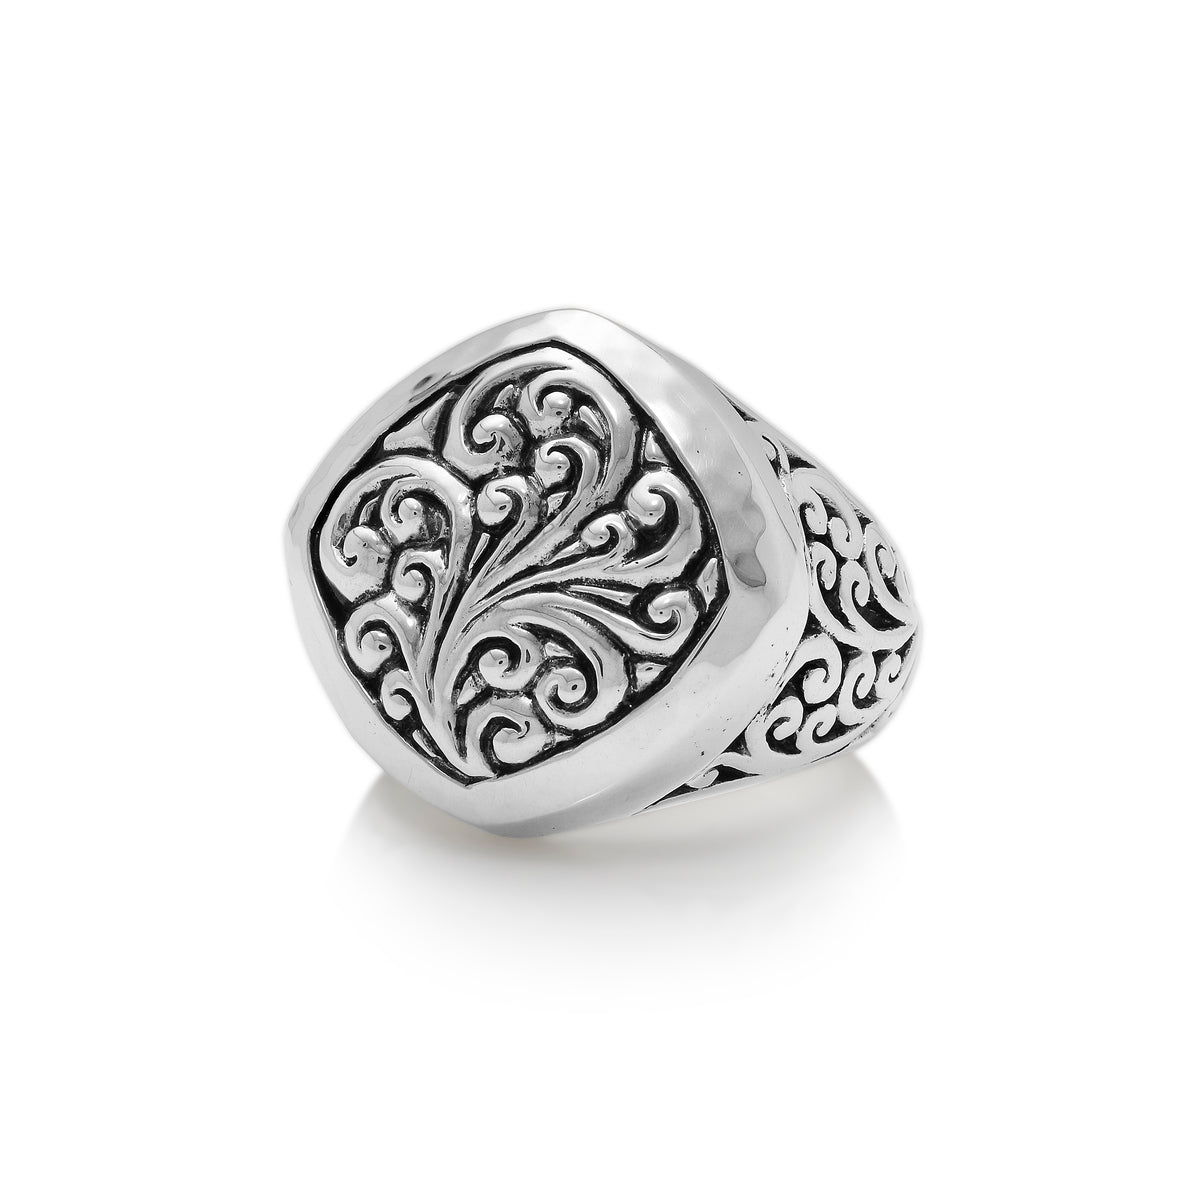 Geometric Statement Scroll Carved Repousse Ring (24mm)